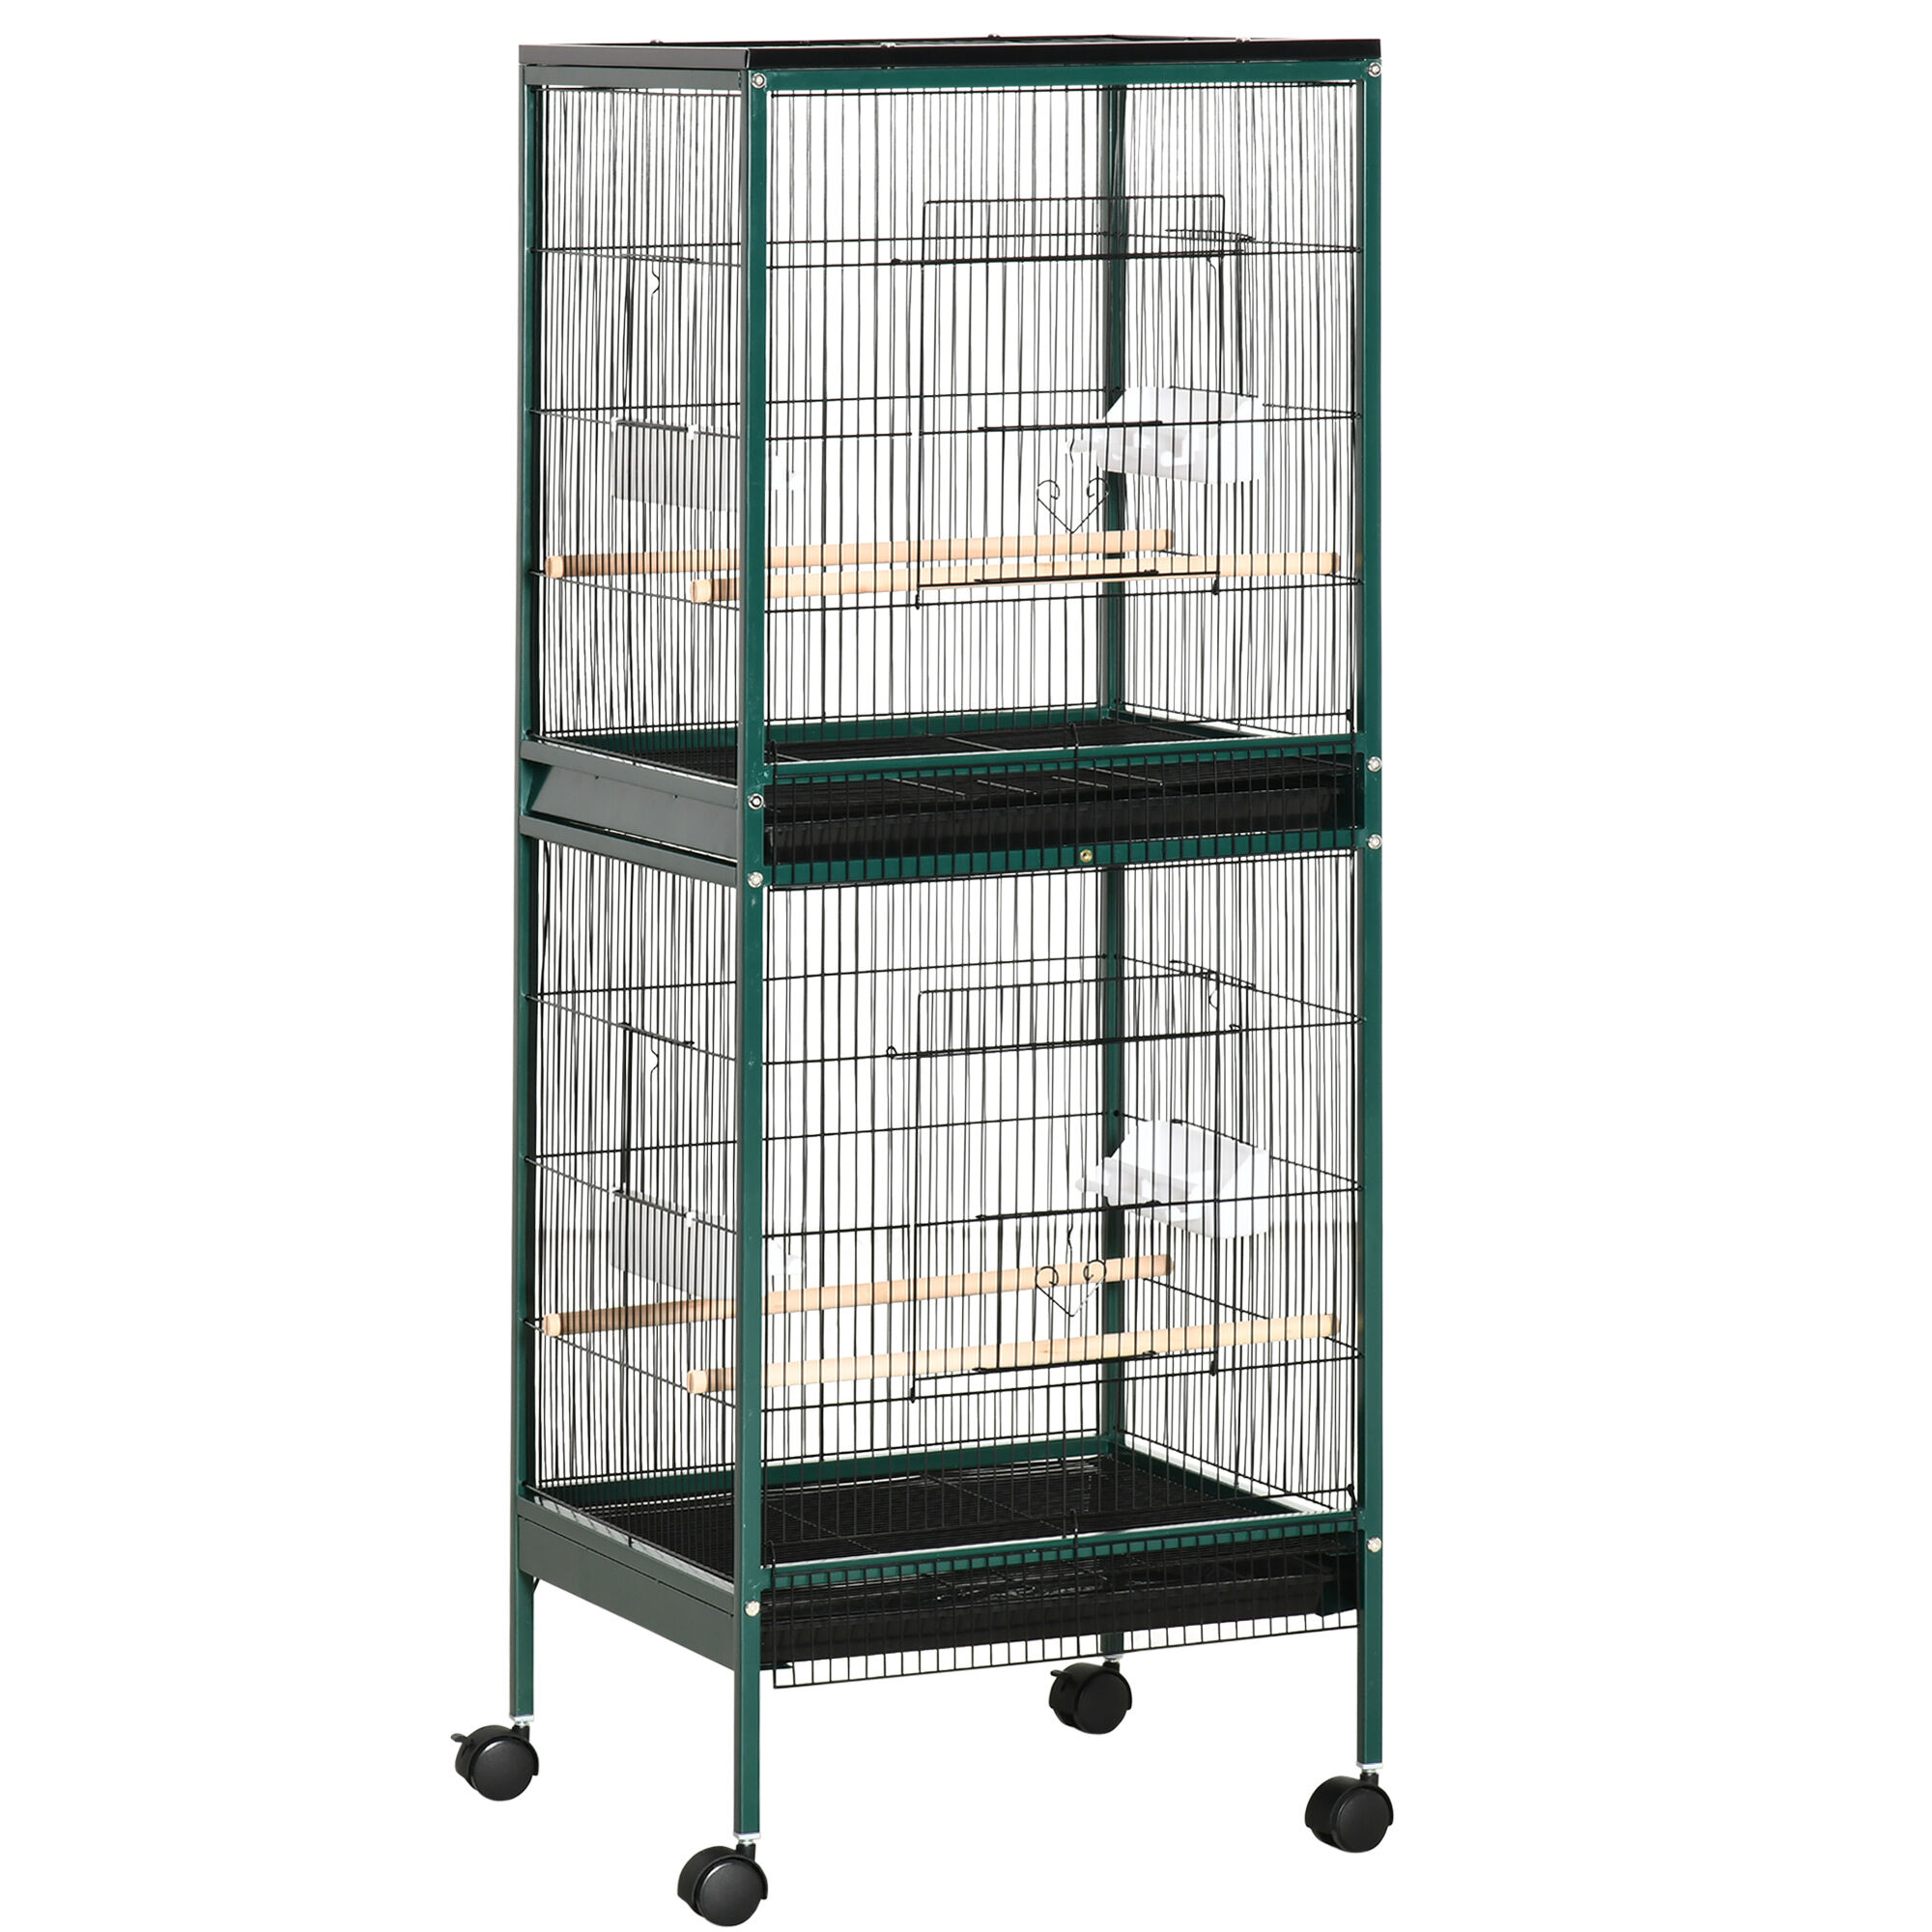 PawHut 55" 2 In 1 Large Bird Cage Parakeet House for Finches Budgies with Wheels Slide-out Trays Wood Perch Food Containers Green   Aosom.com